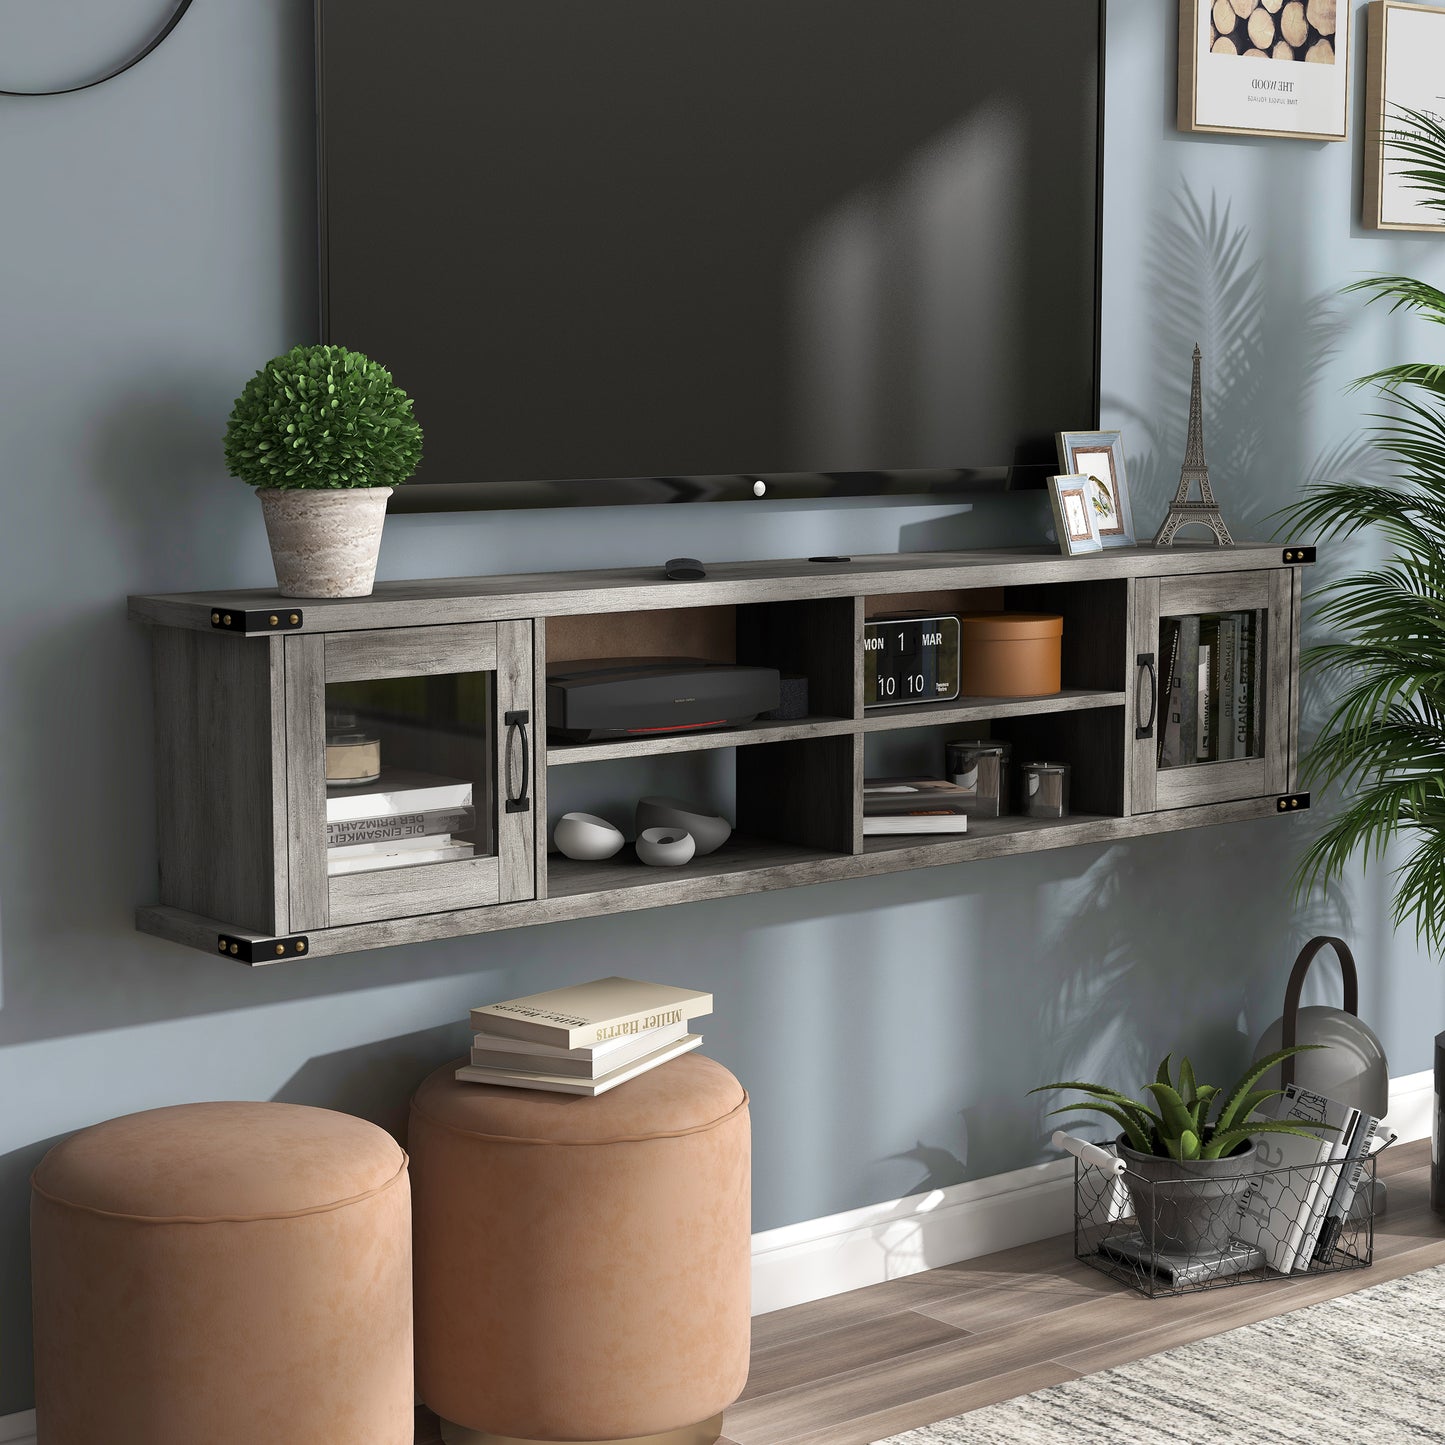 Right angled modern vintage gray oak four-shelf wall mountable TV stand with glass doors in a living room with accessories